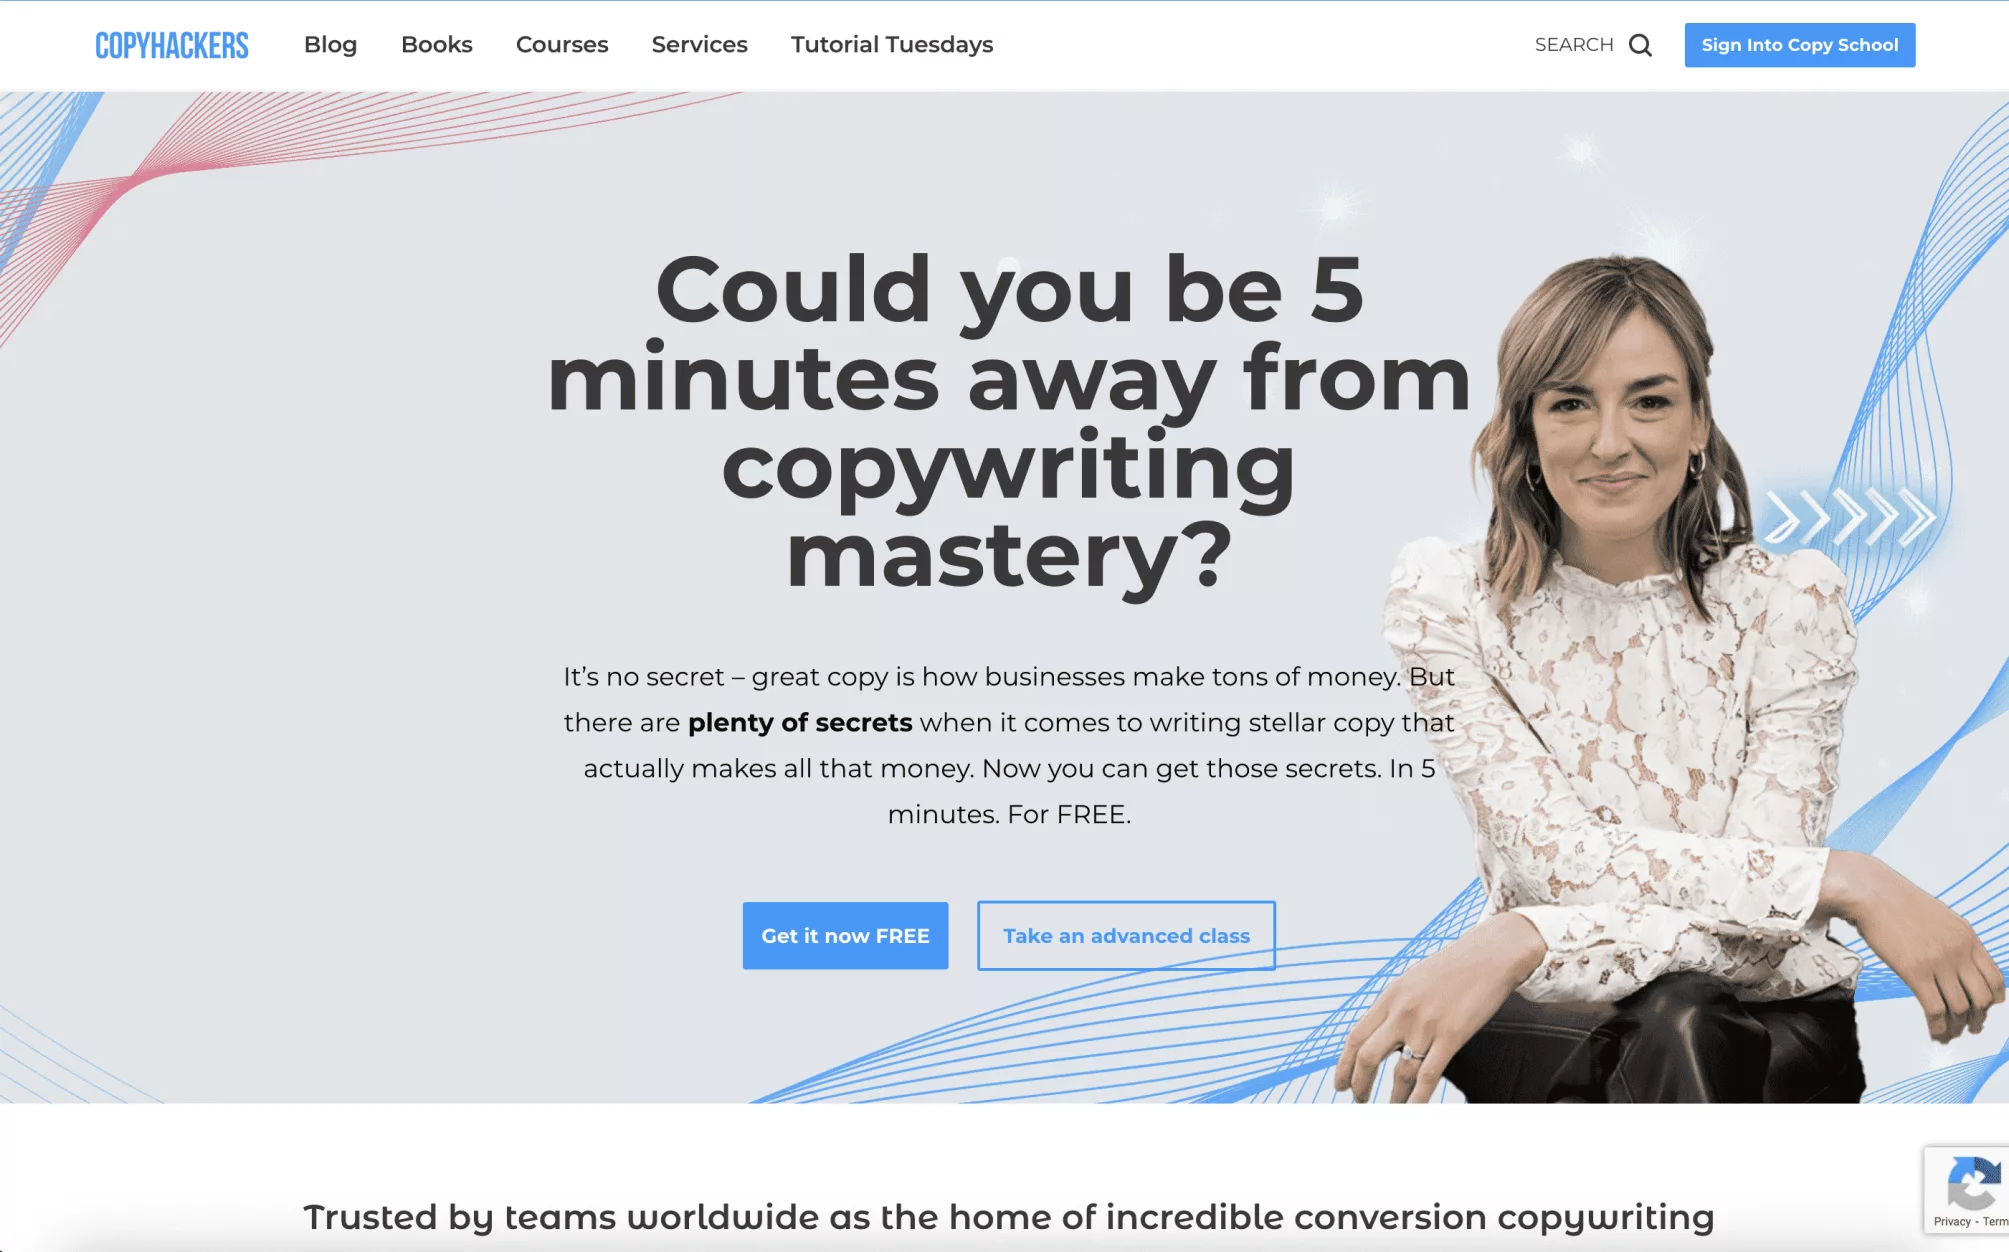 The [Ultimate] Website For Copywriting Mastery.